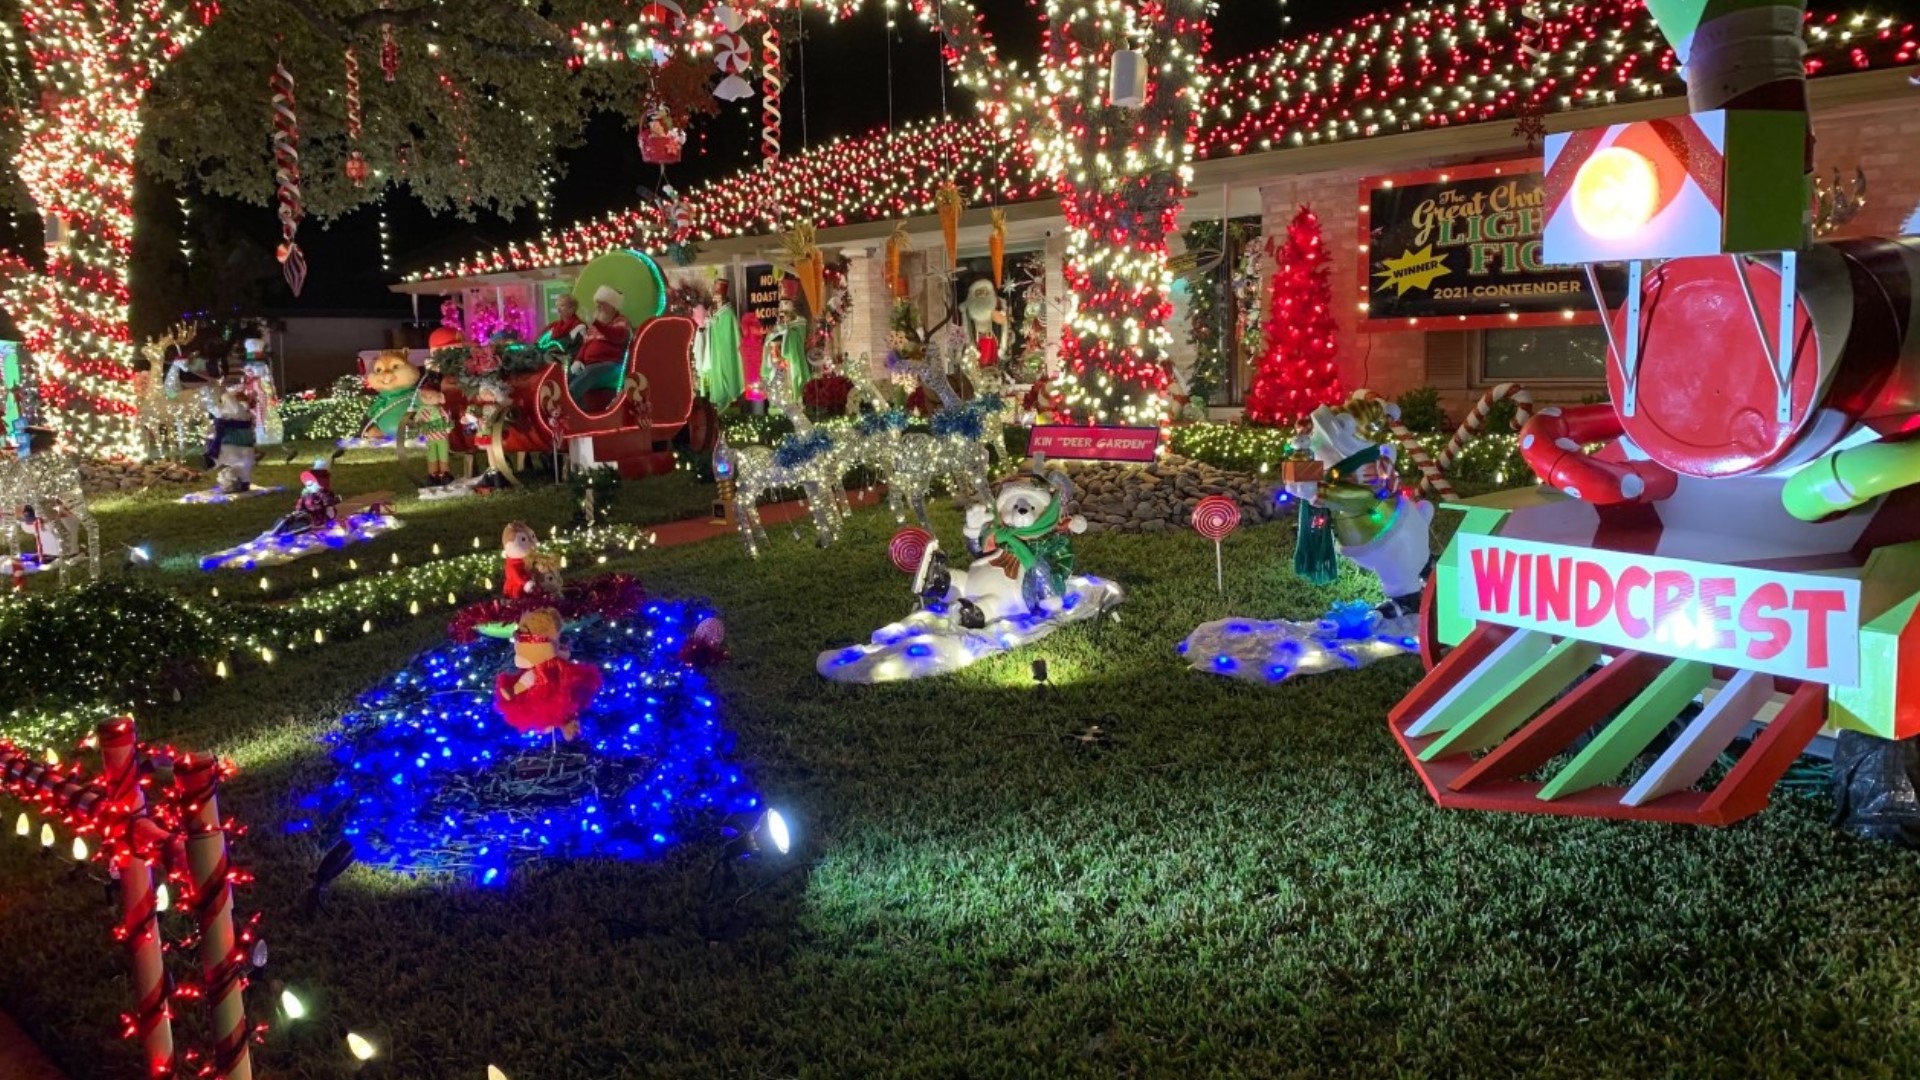 Take it from a Windcrest couple who just won $50K for their Christmas decor: If you're plugging in lots of lights, you'll want to follow simple safety measures.